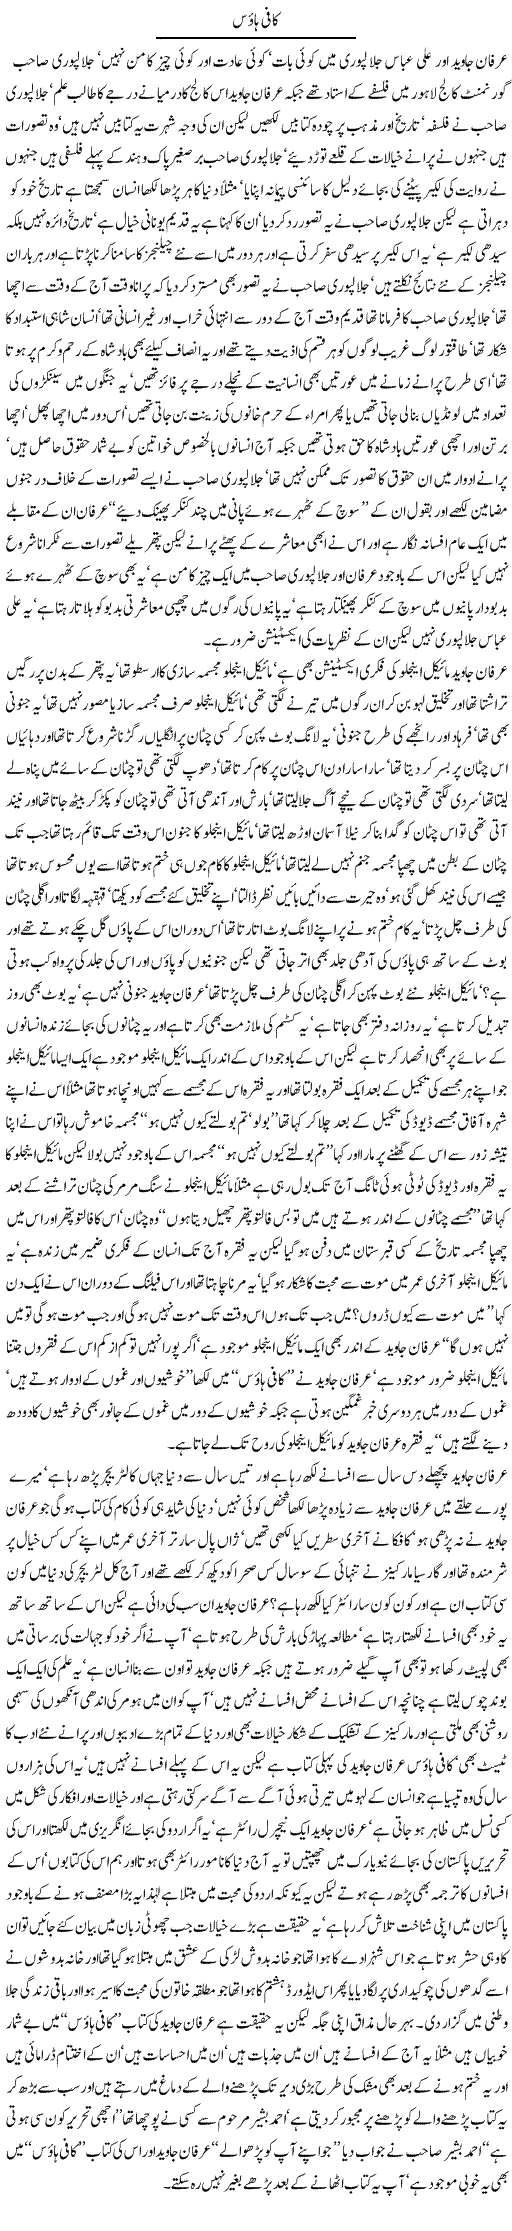 Coffee House Express Column Javed Chaudhry 28 August 2011